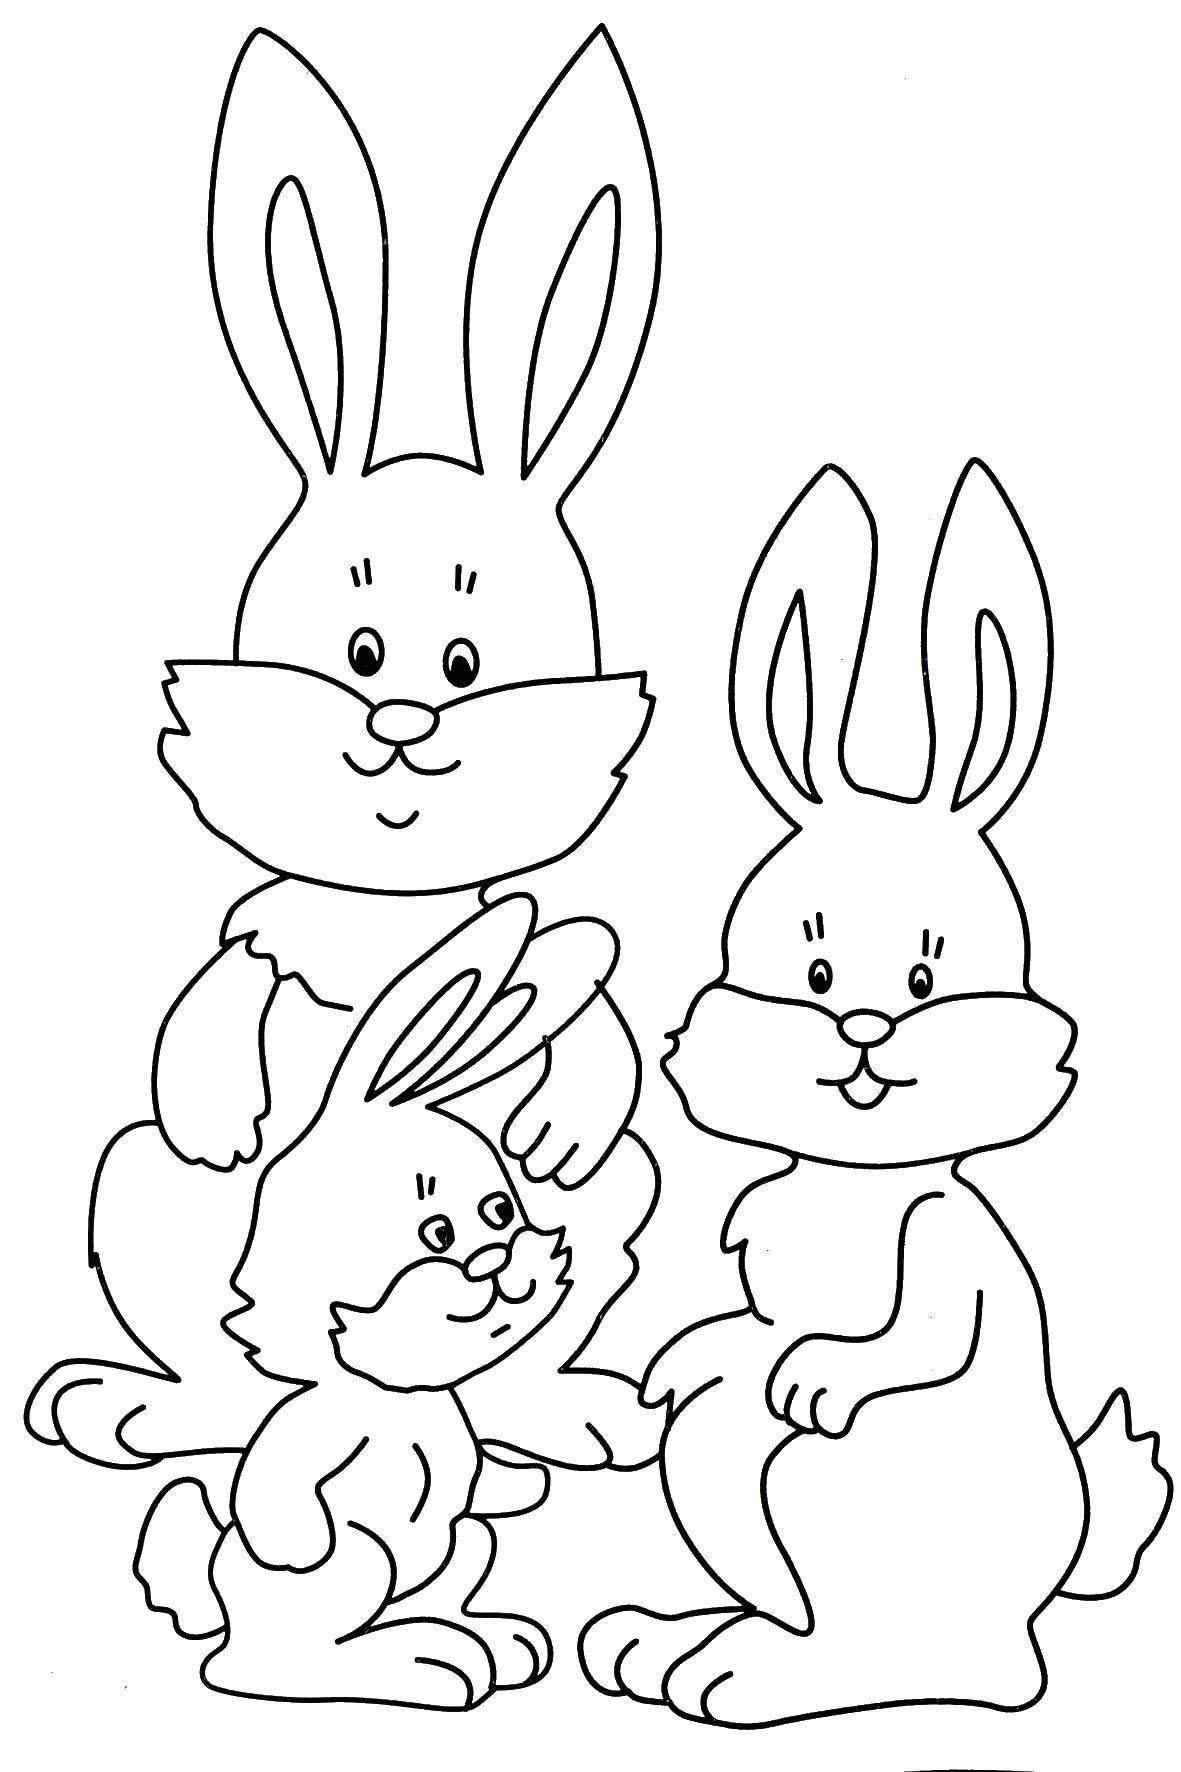 Coloring The family of bunnies. Category Family. Tags:  Family, parents, children.